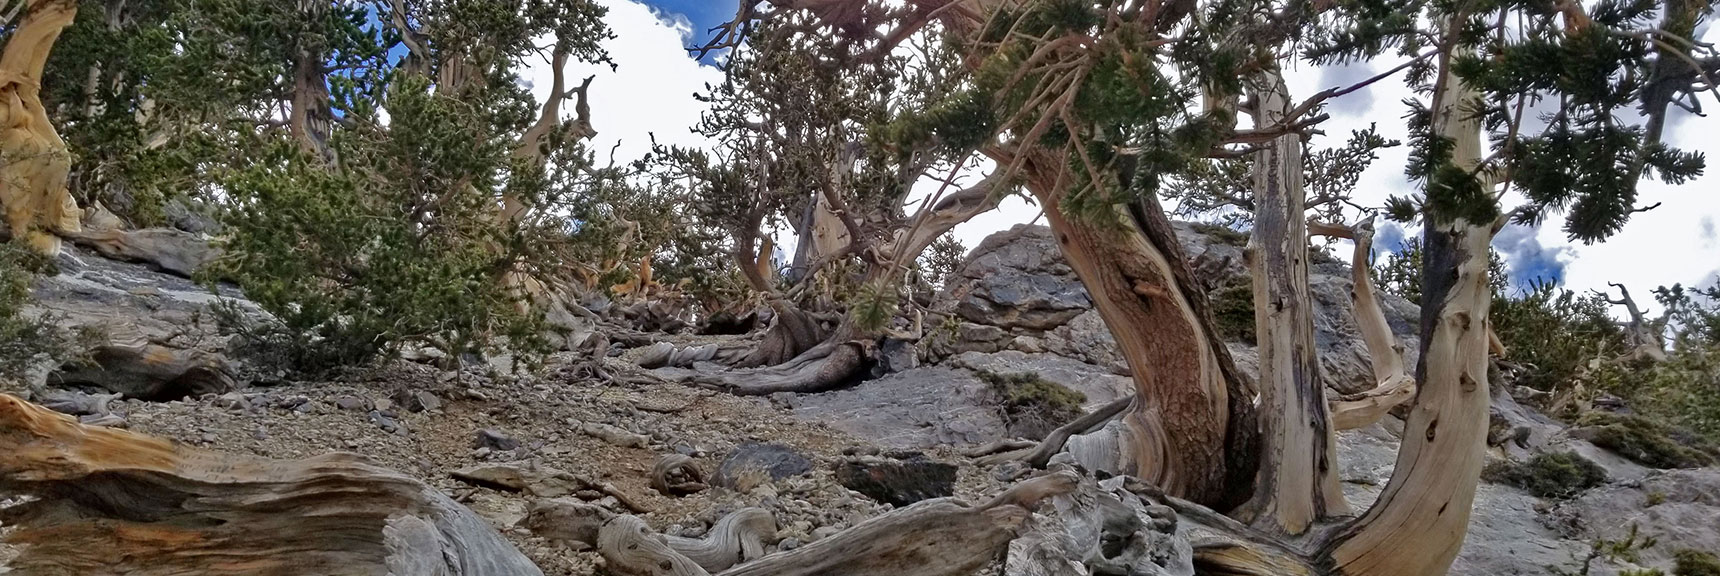 Looking Through More Pines Toward the Eastern Summit Cliff. | The Sisters South | Lee Canyon | Mt Charleston Wilderness | Spring Mountains, Nevada